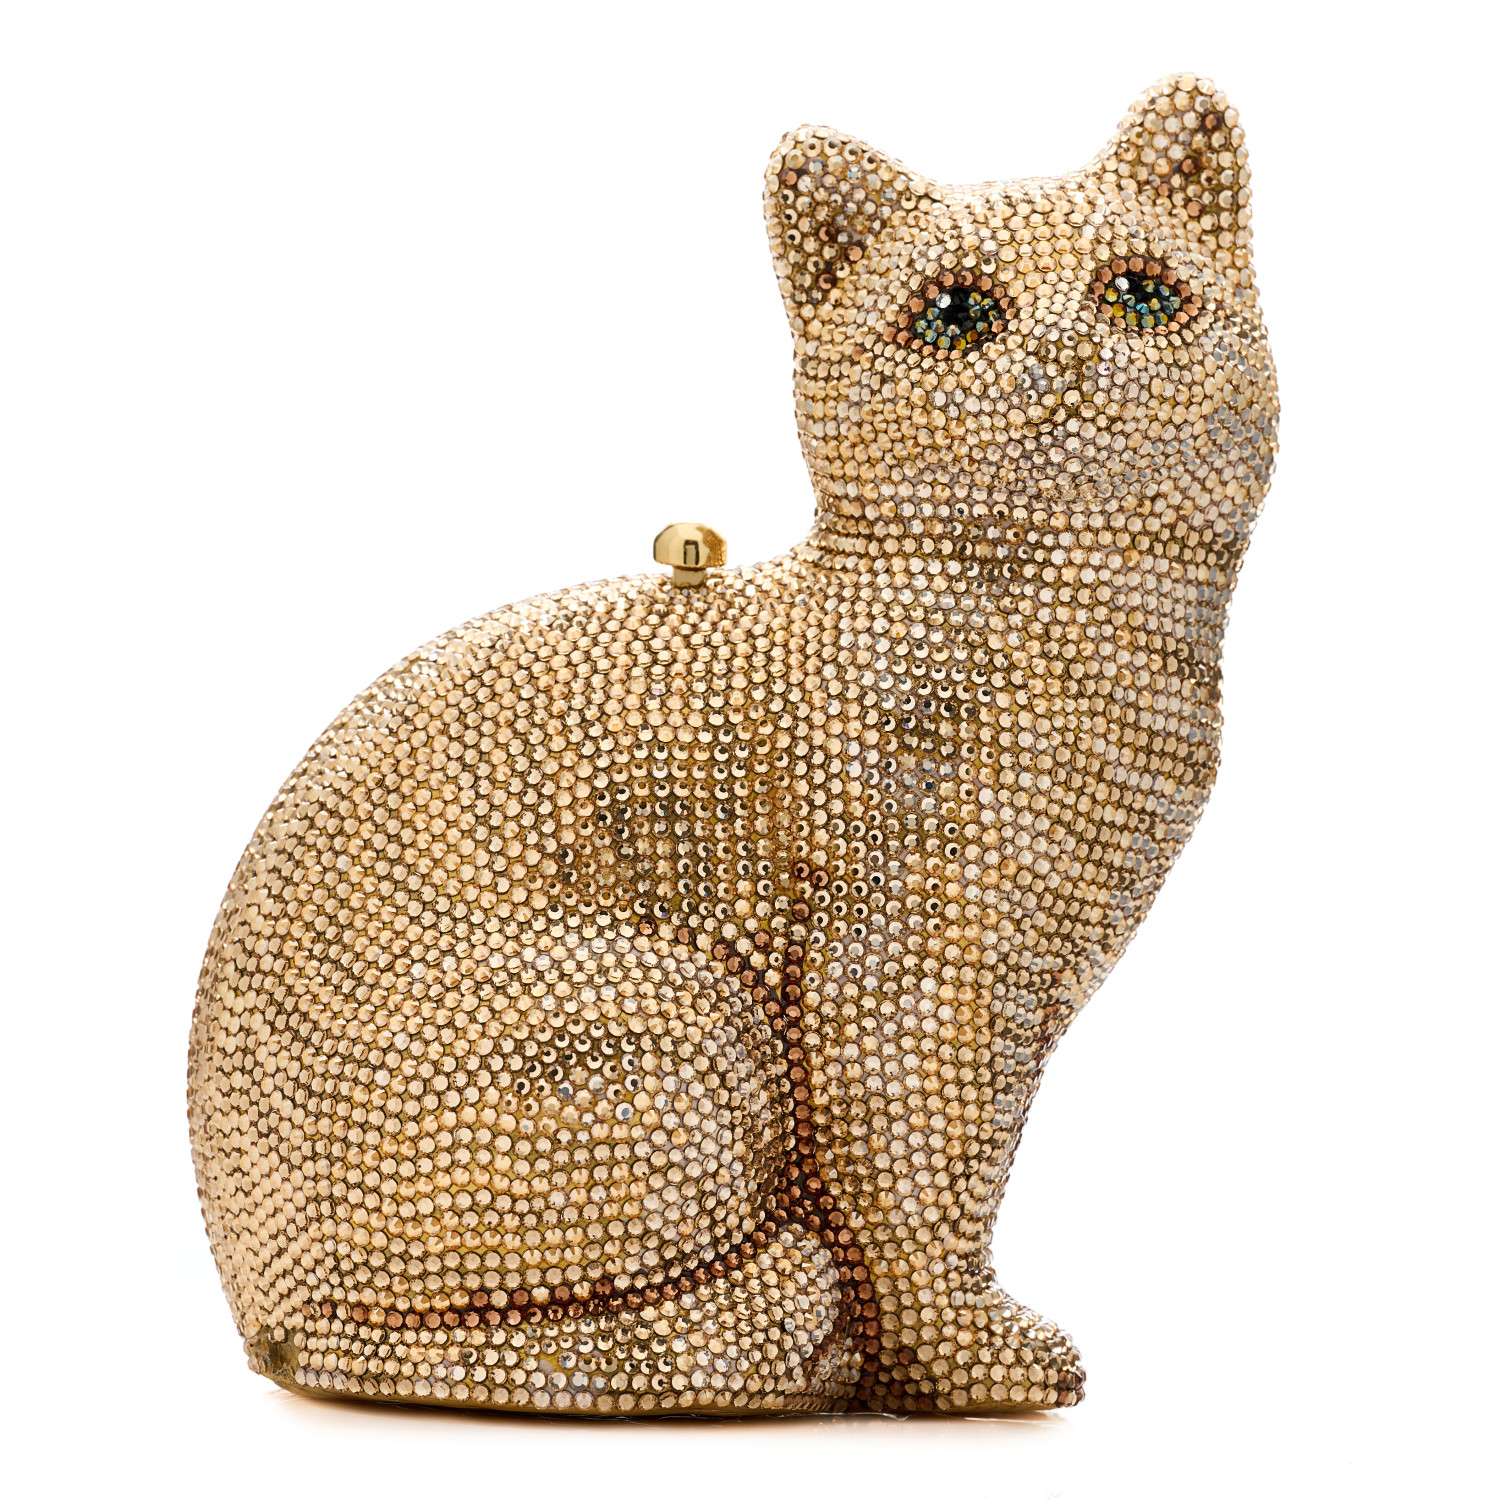 JUDITH LEIBER Swarovski Crystal Cat Minaudiere Clutch in the color Gold by FASHIONPHILE